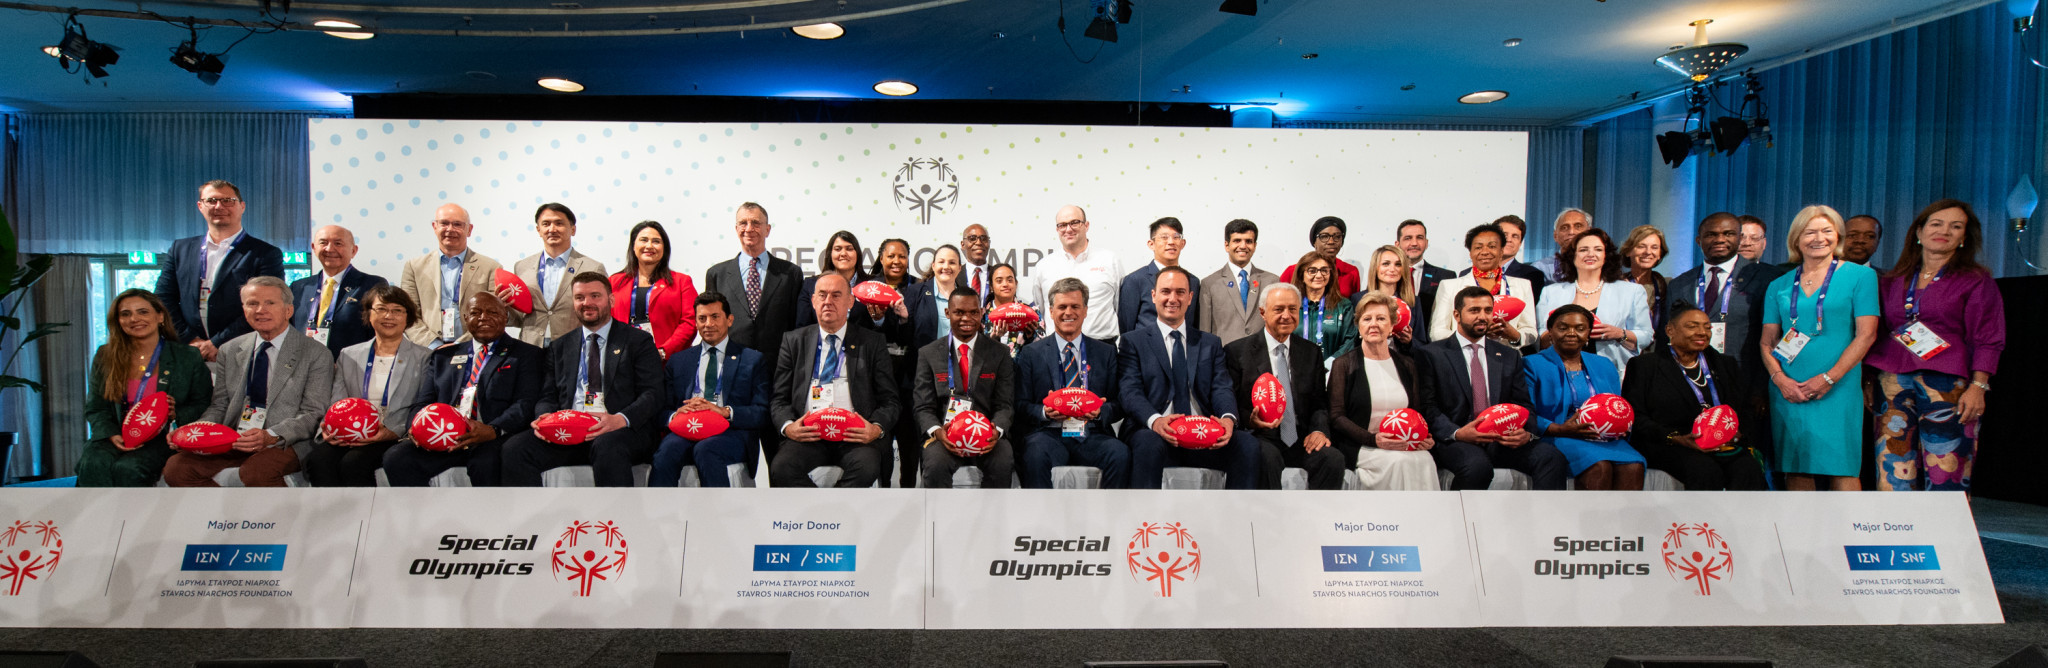 A Global Leadership Coalition for Inclusion launched at the Special Olympics World Games on Sunday (June 18) ©Ralf Kuckuck/Special Olympics Europe Eurasia